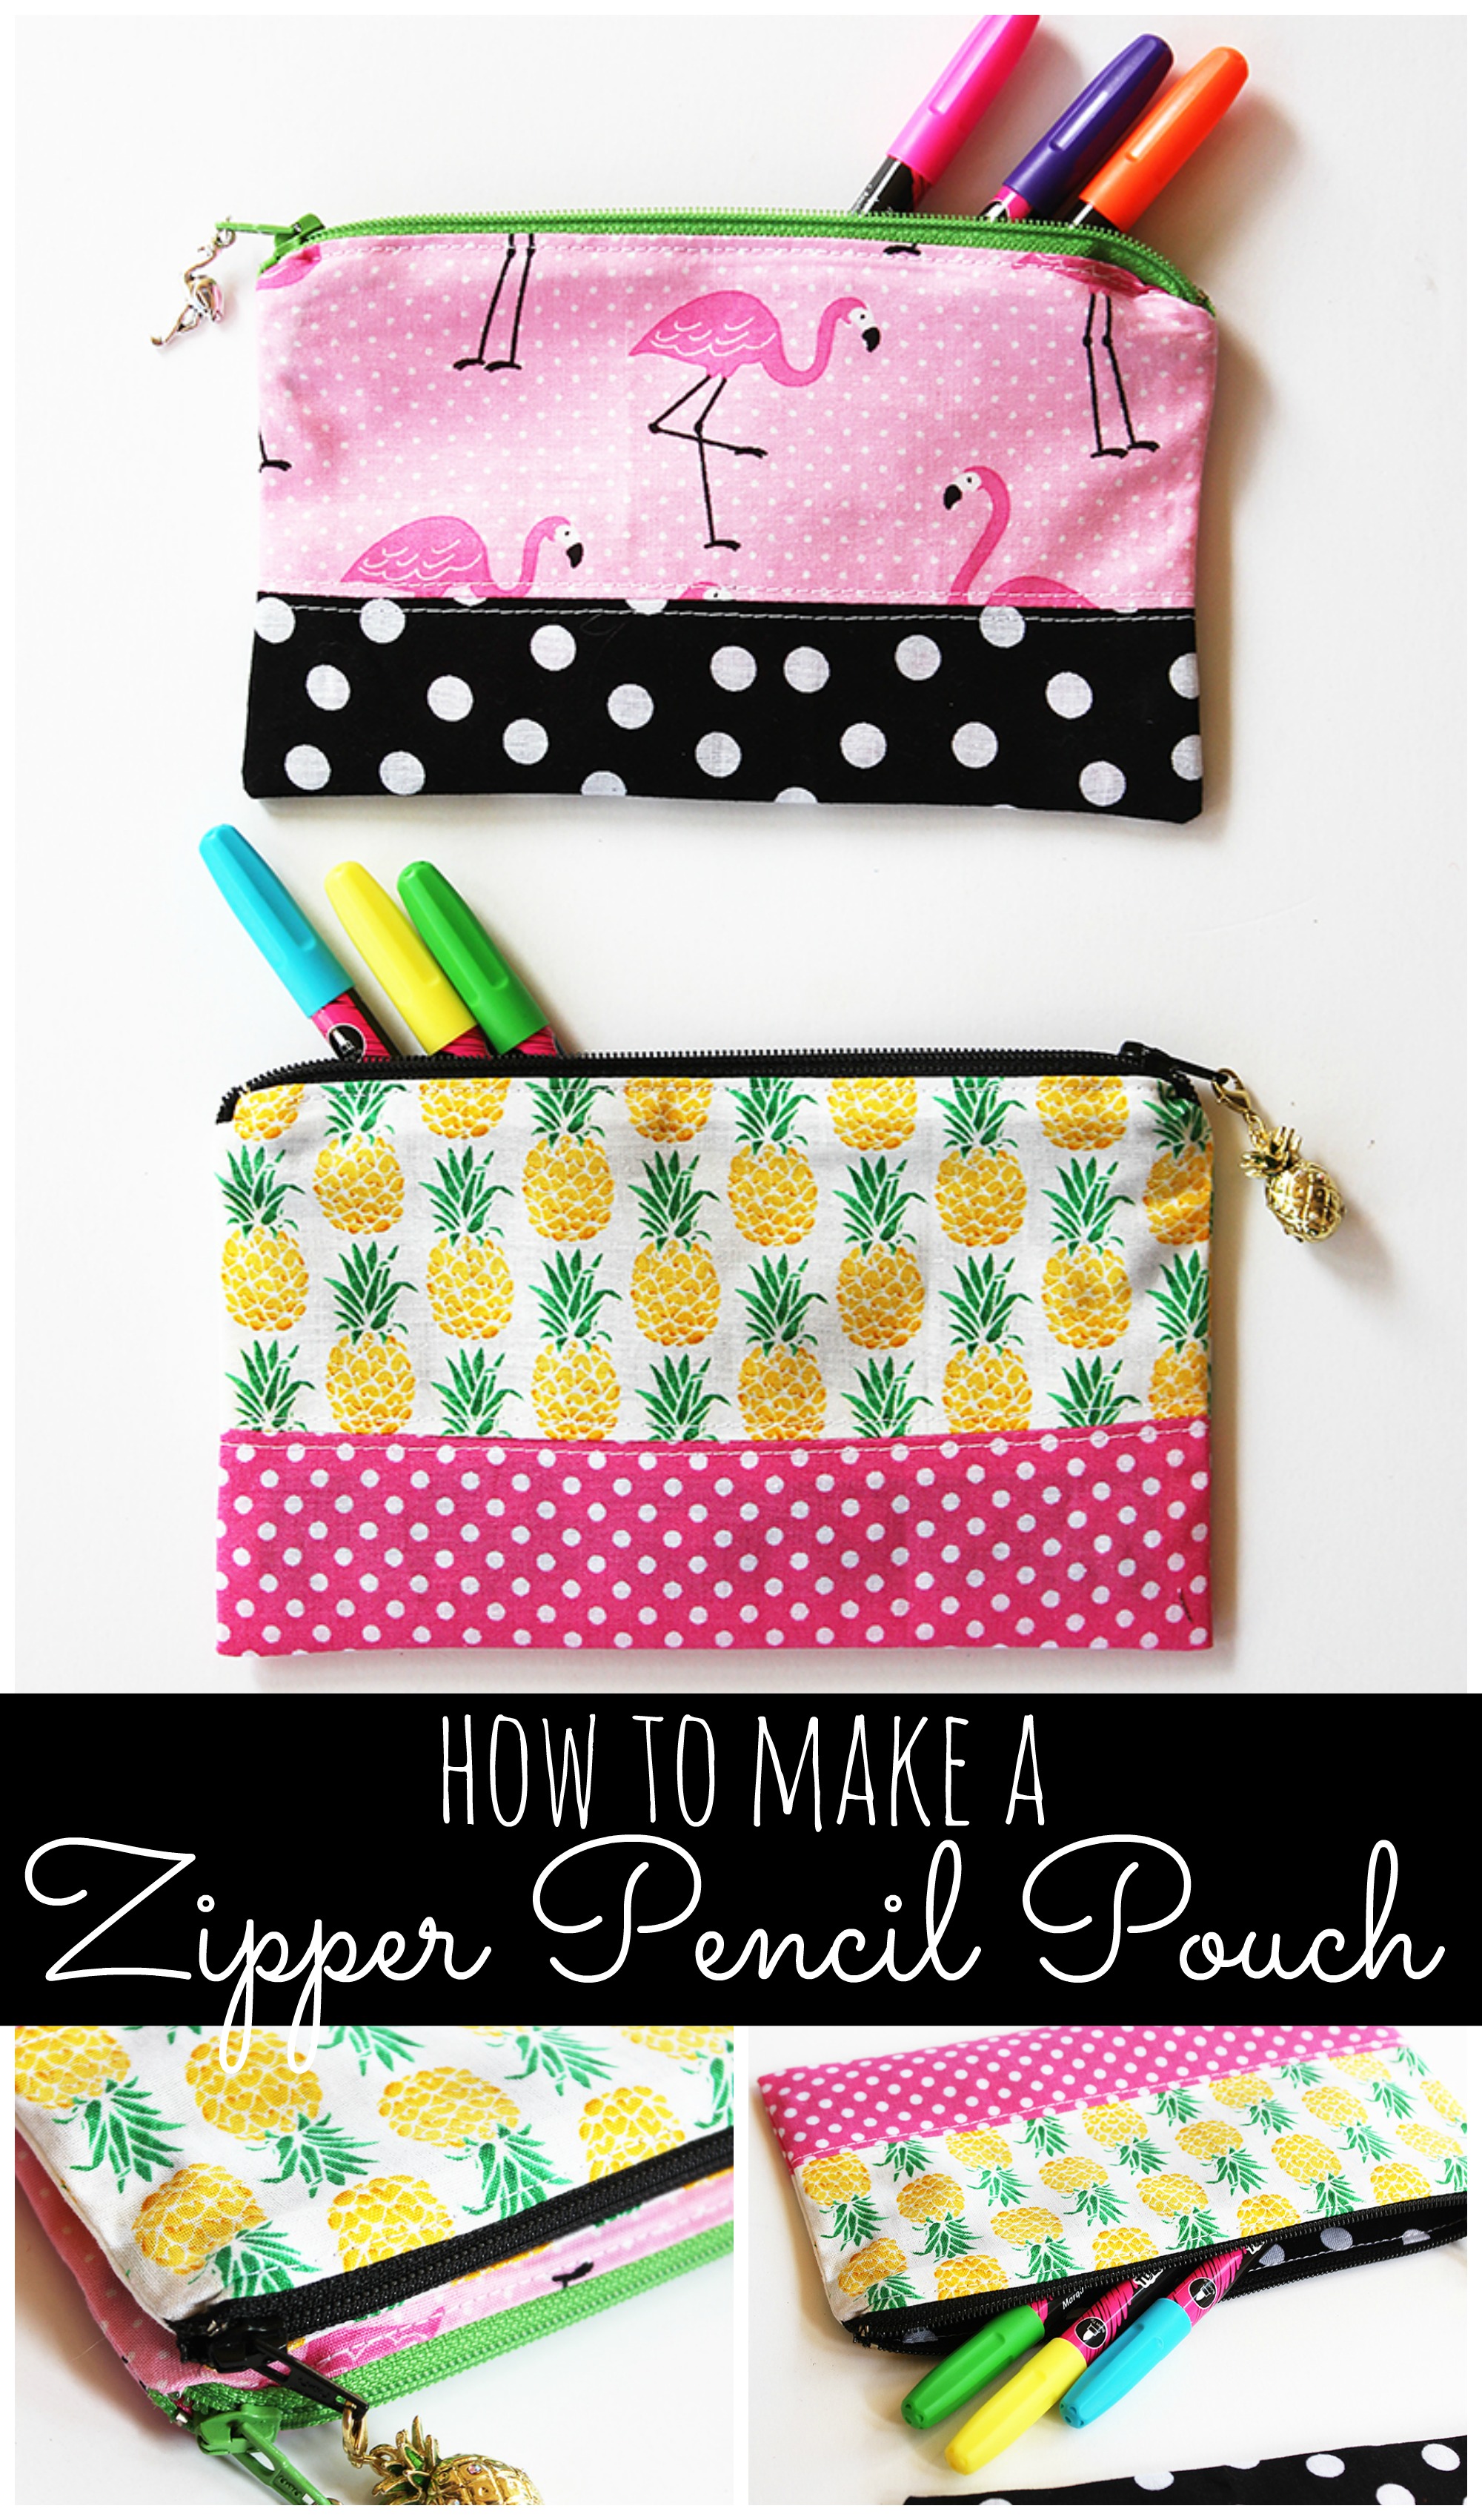 How to create a Pencil Case entierly from Measuring Tape